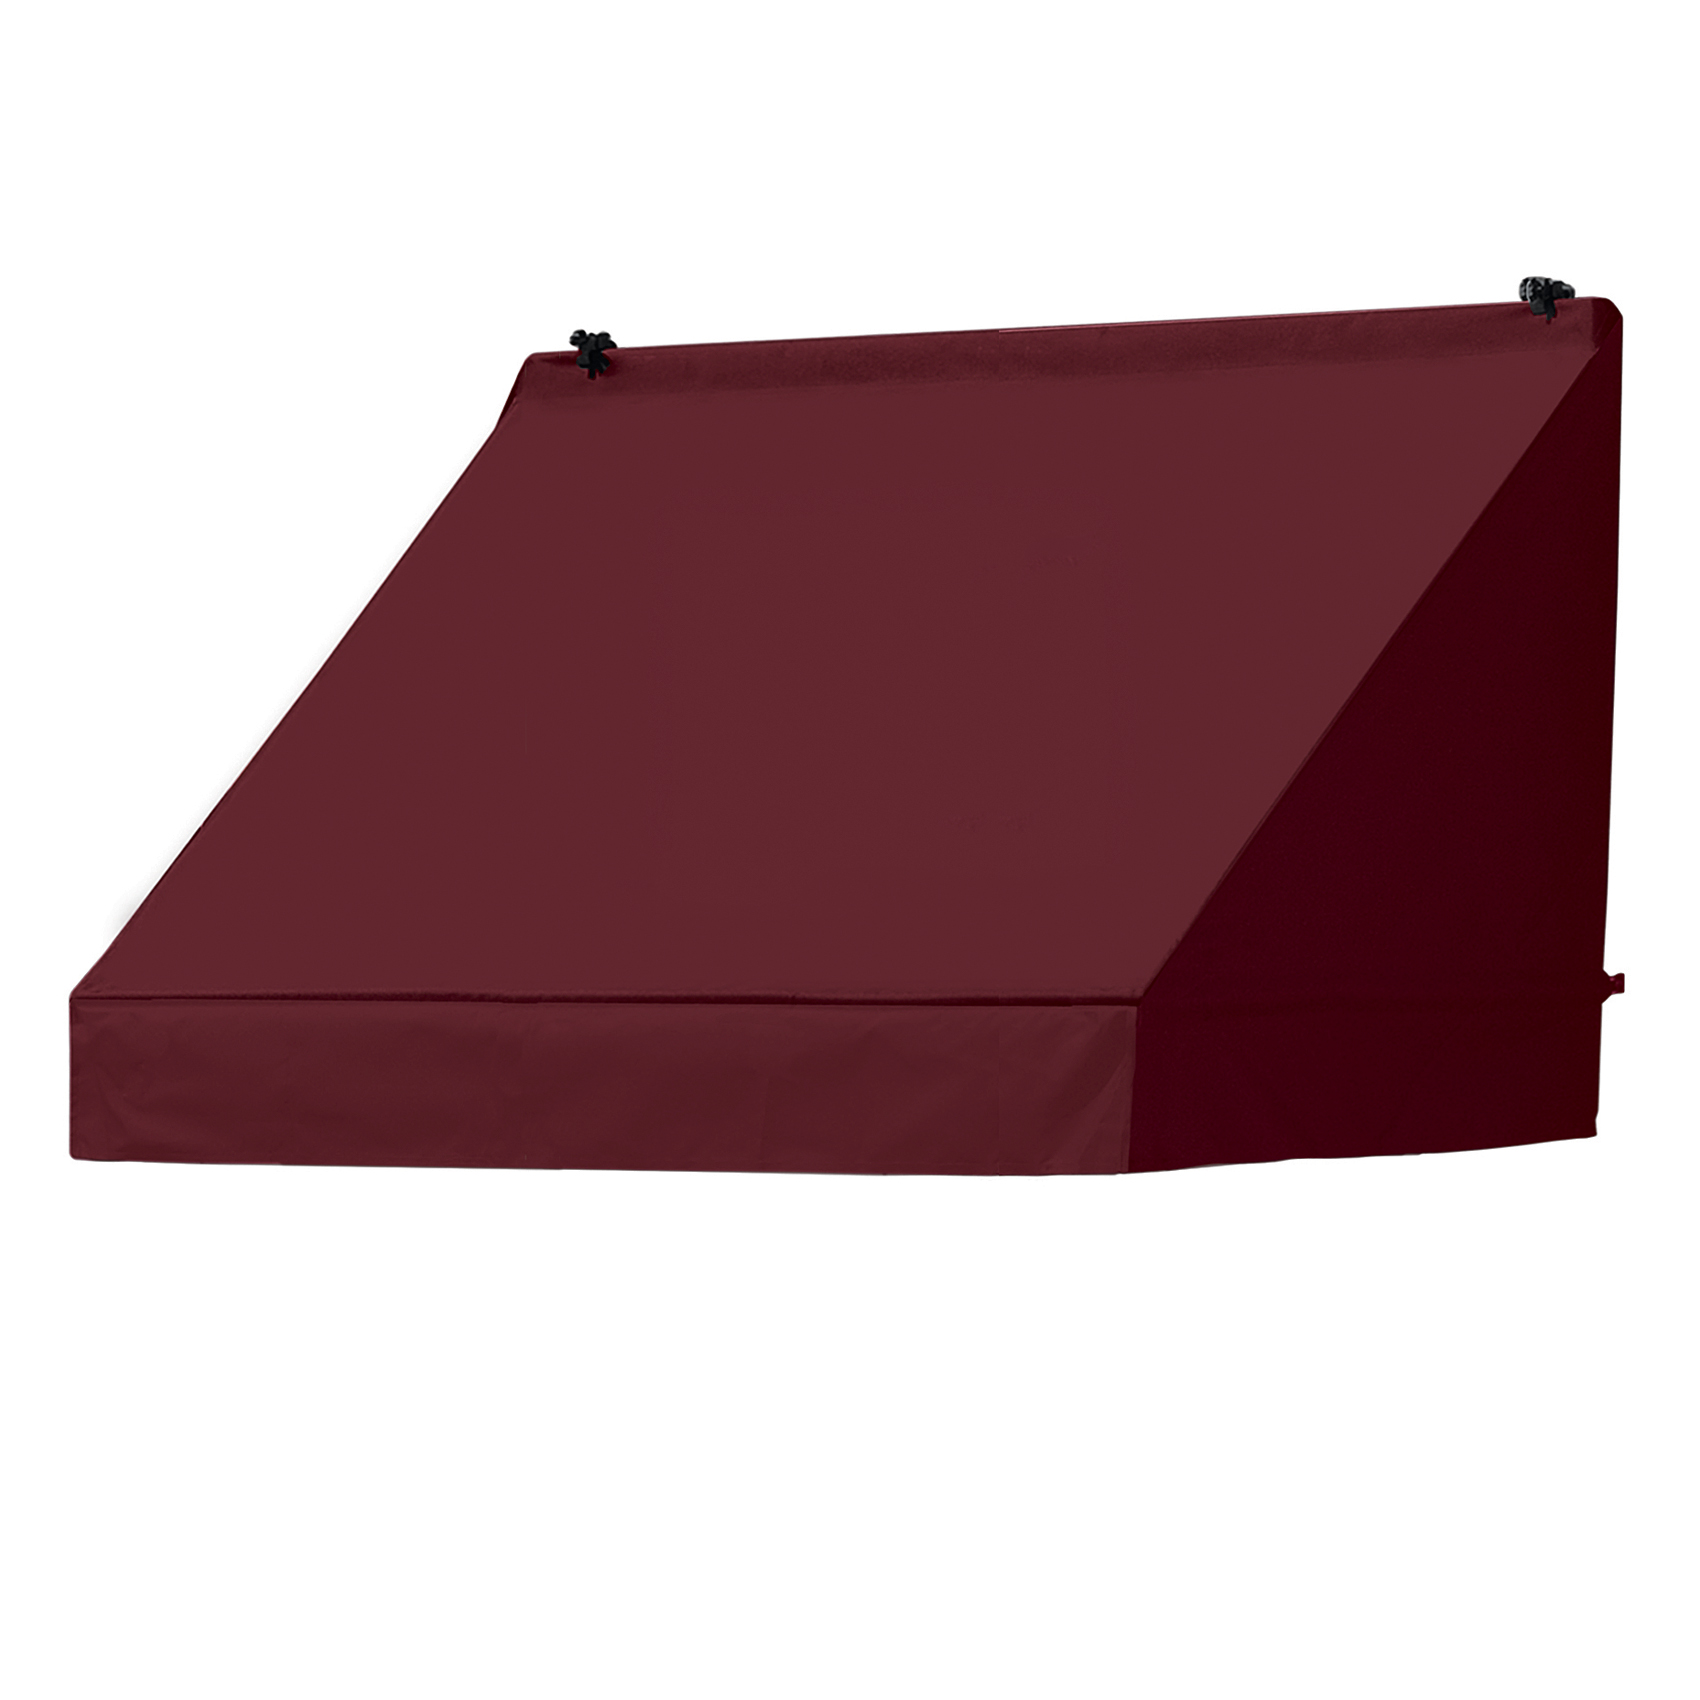 Awnings in a Box&reg; 4' Classic Style Awning Replacement Cover in Assorted Colors